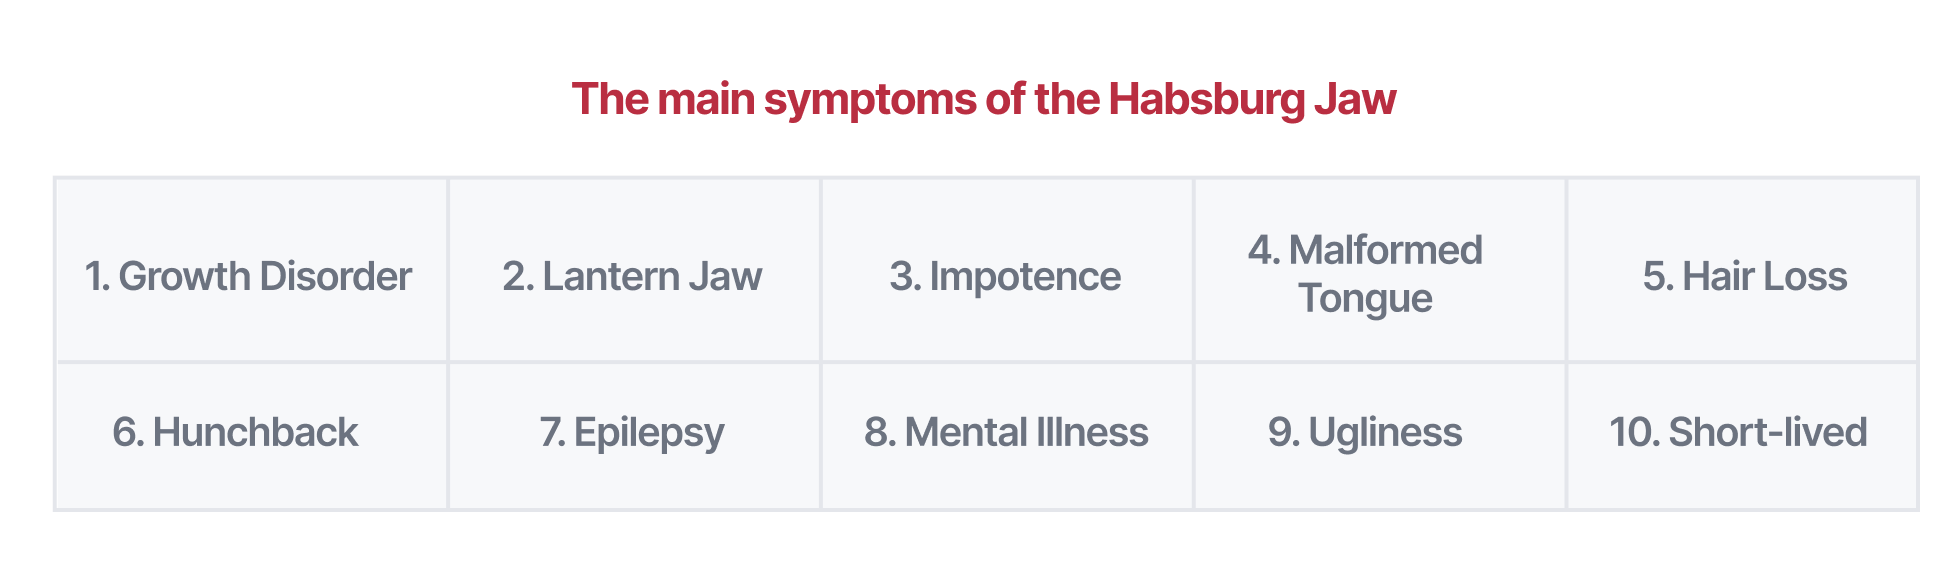 The main symptoms of the Habsburg family includes: Growth disorder, lantern jaw, impotence, malformed tongue, hair loss, hunchback, epilepsy, mental illness, ugliness and short-lived